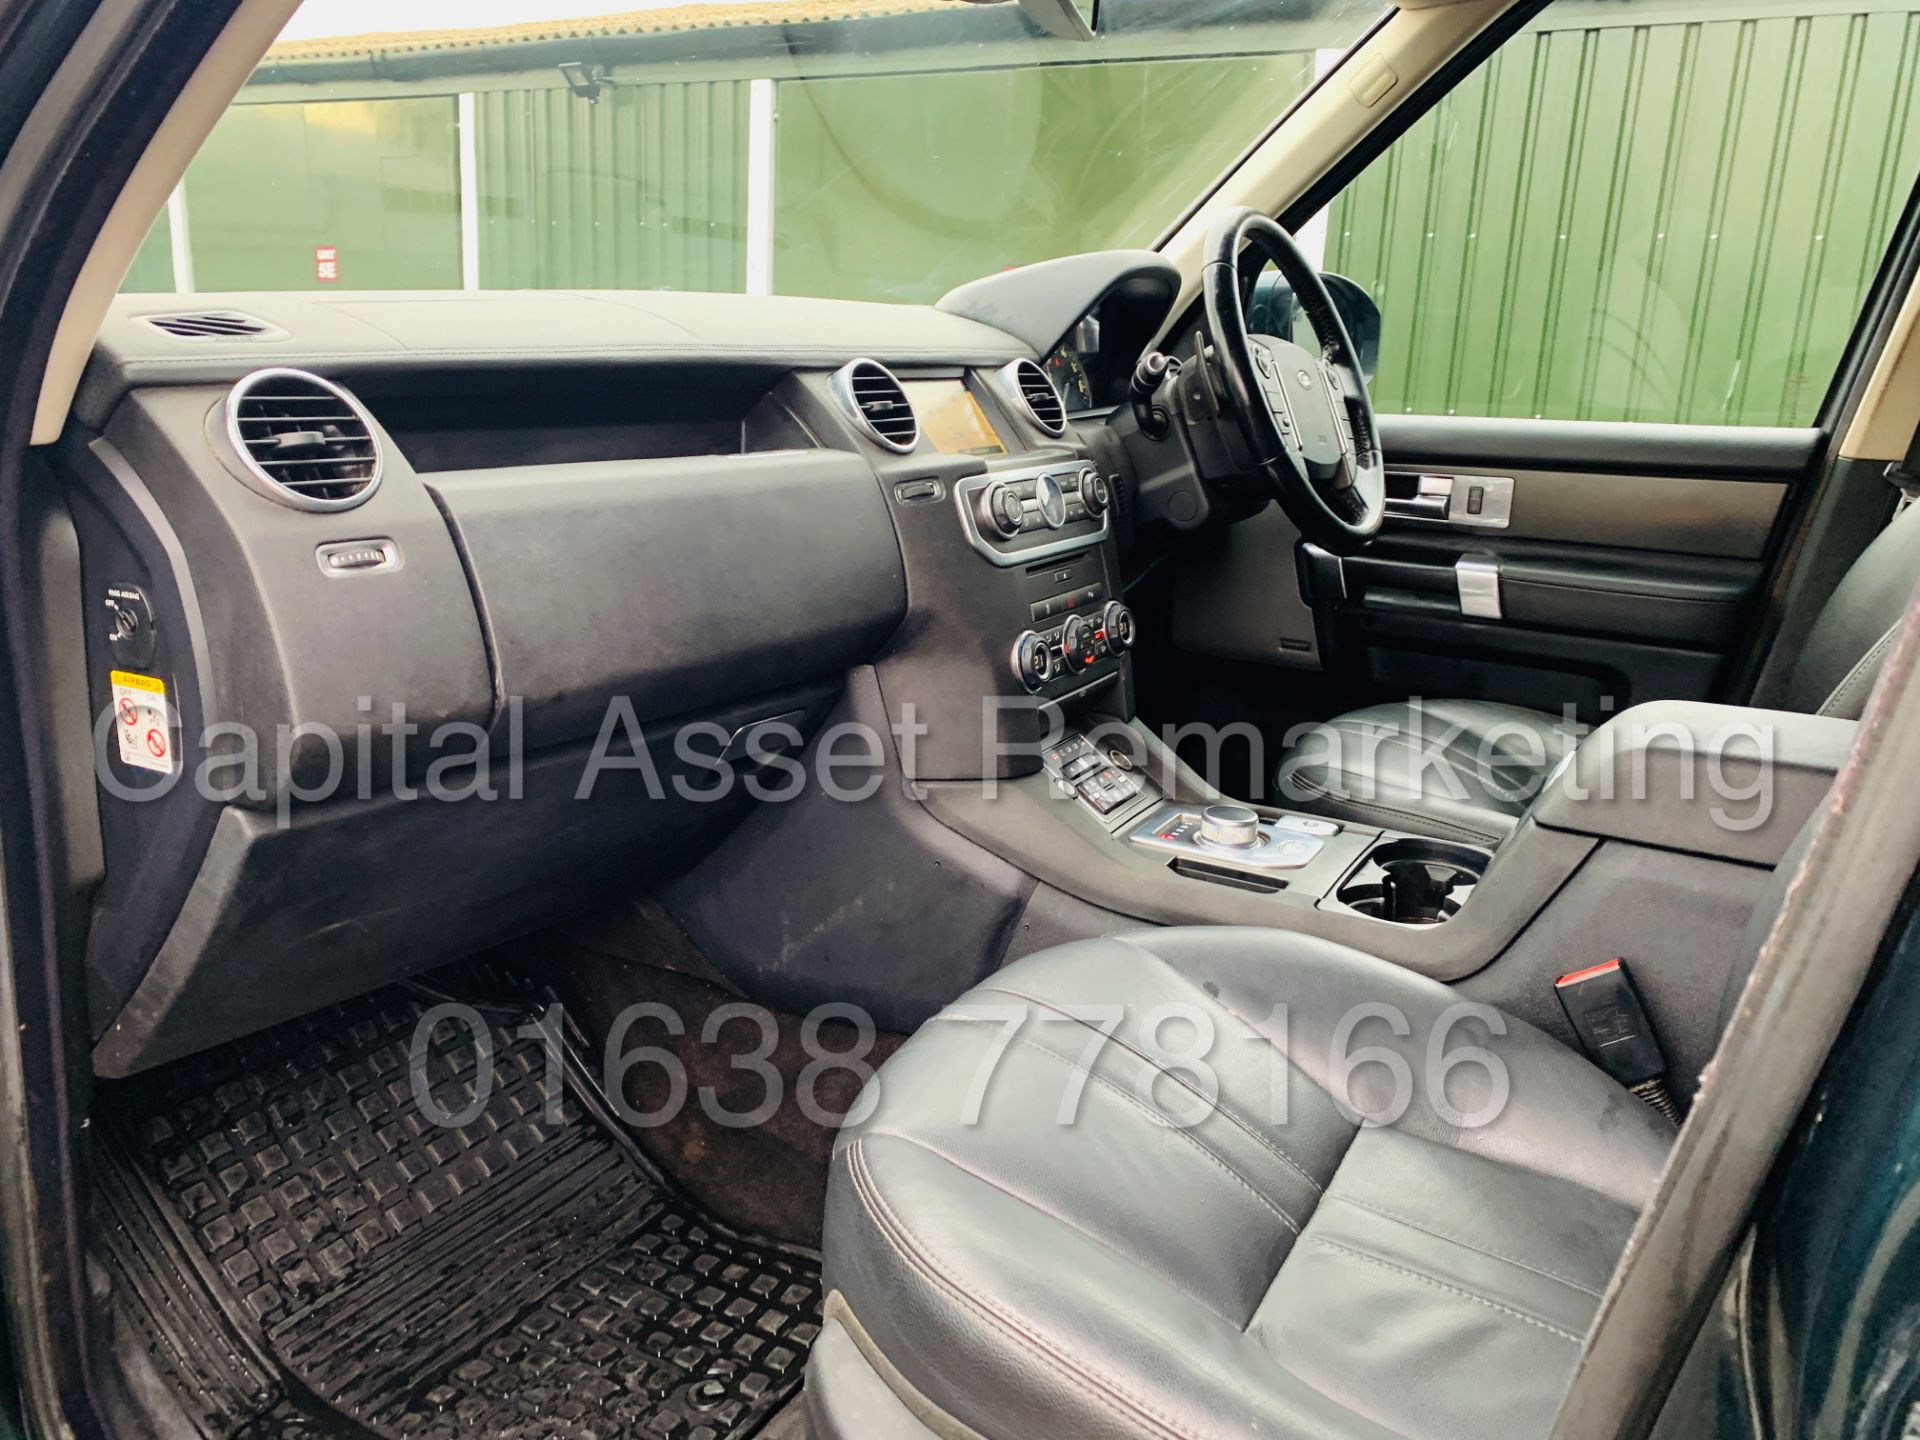 LAND ROVER DISCOVERY 4 *XS EDITION* UTILITY COMMERCIAL (2014) '3.0 SDV6 - 8 SPEED AUTO' *TOP SPEC* - Image 20 of 49